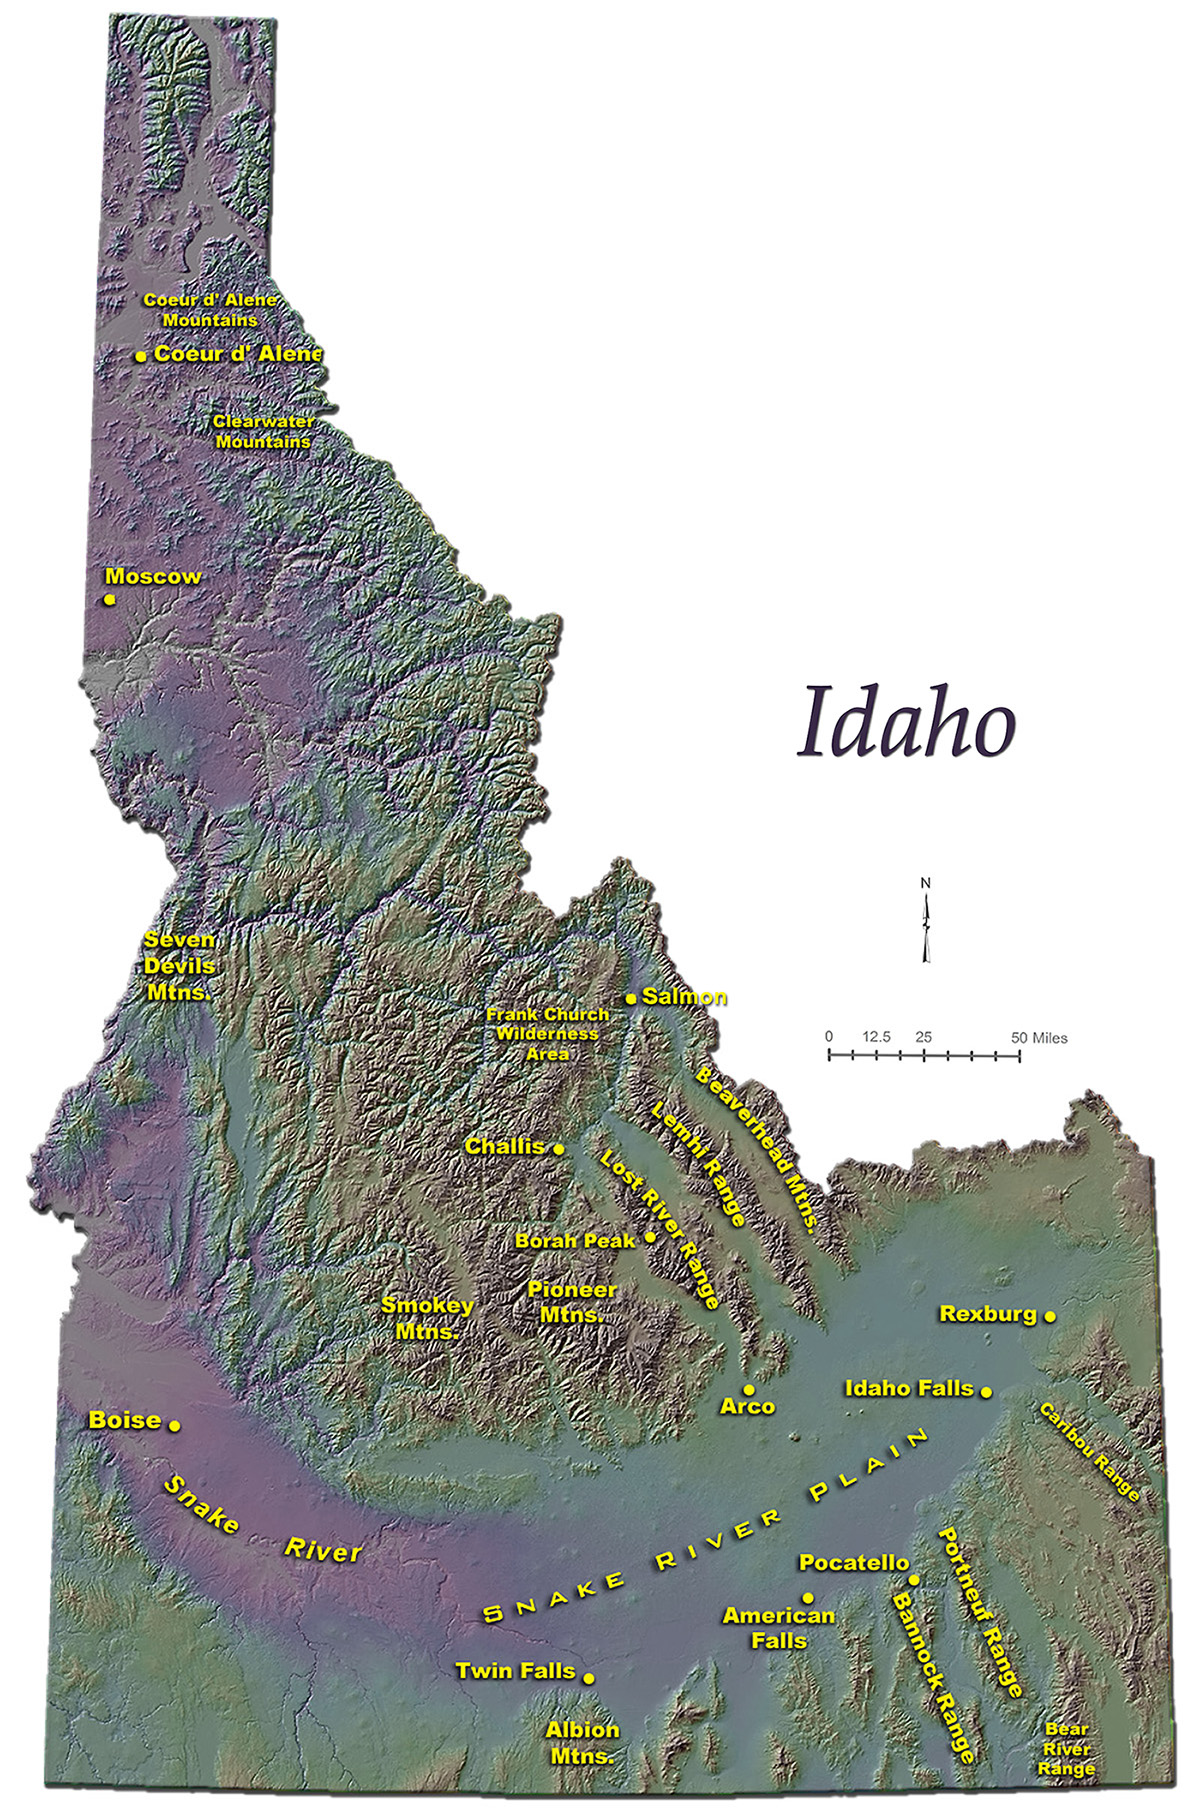 Shaded relief map of Idaho showing major population centers and mountain ranges